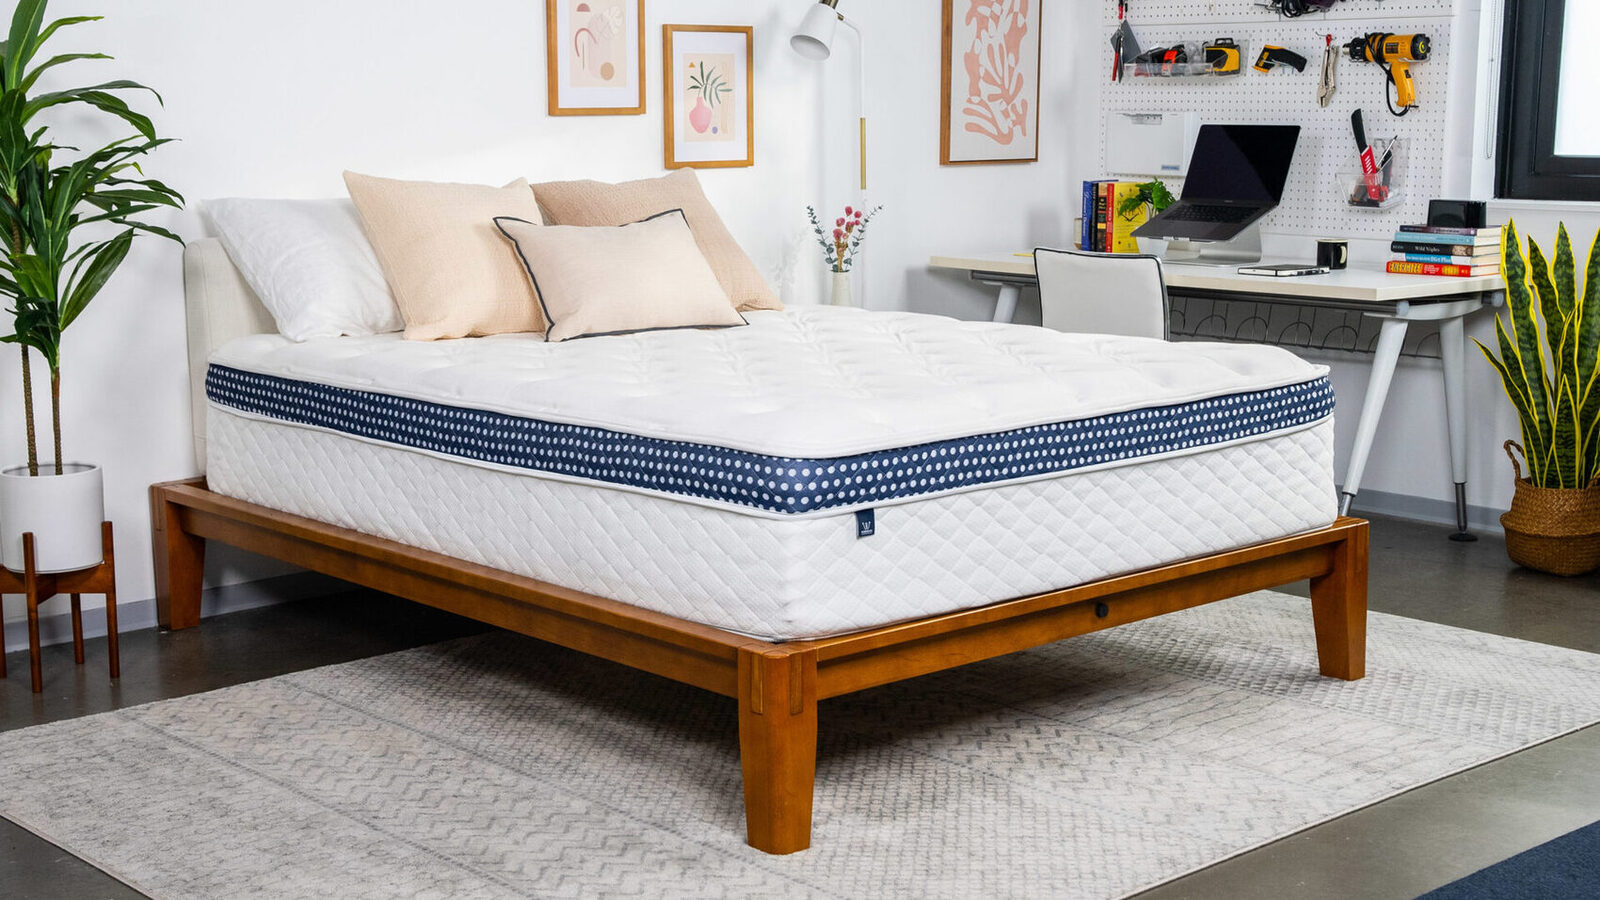 How To Store A Mattress: Expert Tips To Promote Sleep